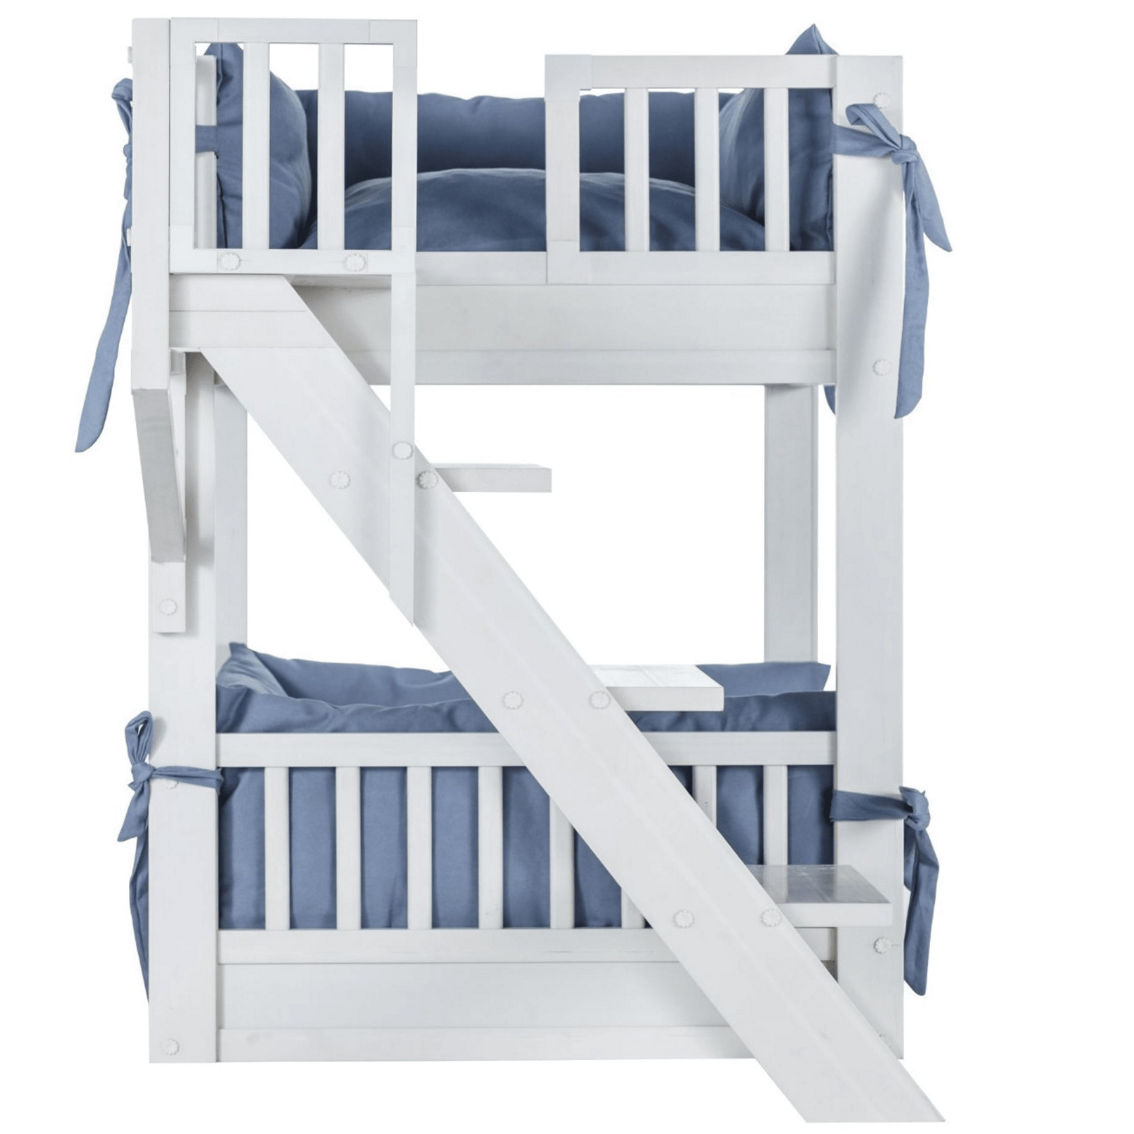 New Age Pet® ECOFLEX® Dog Bunk Bed with Removable Cushions - Grey - Image 4 of 5